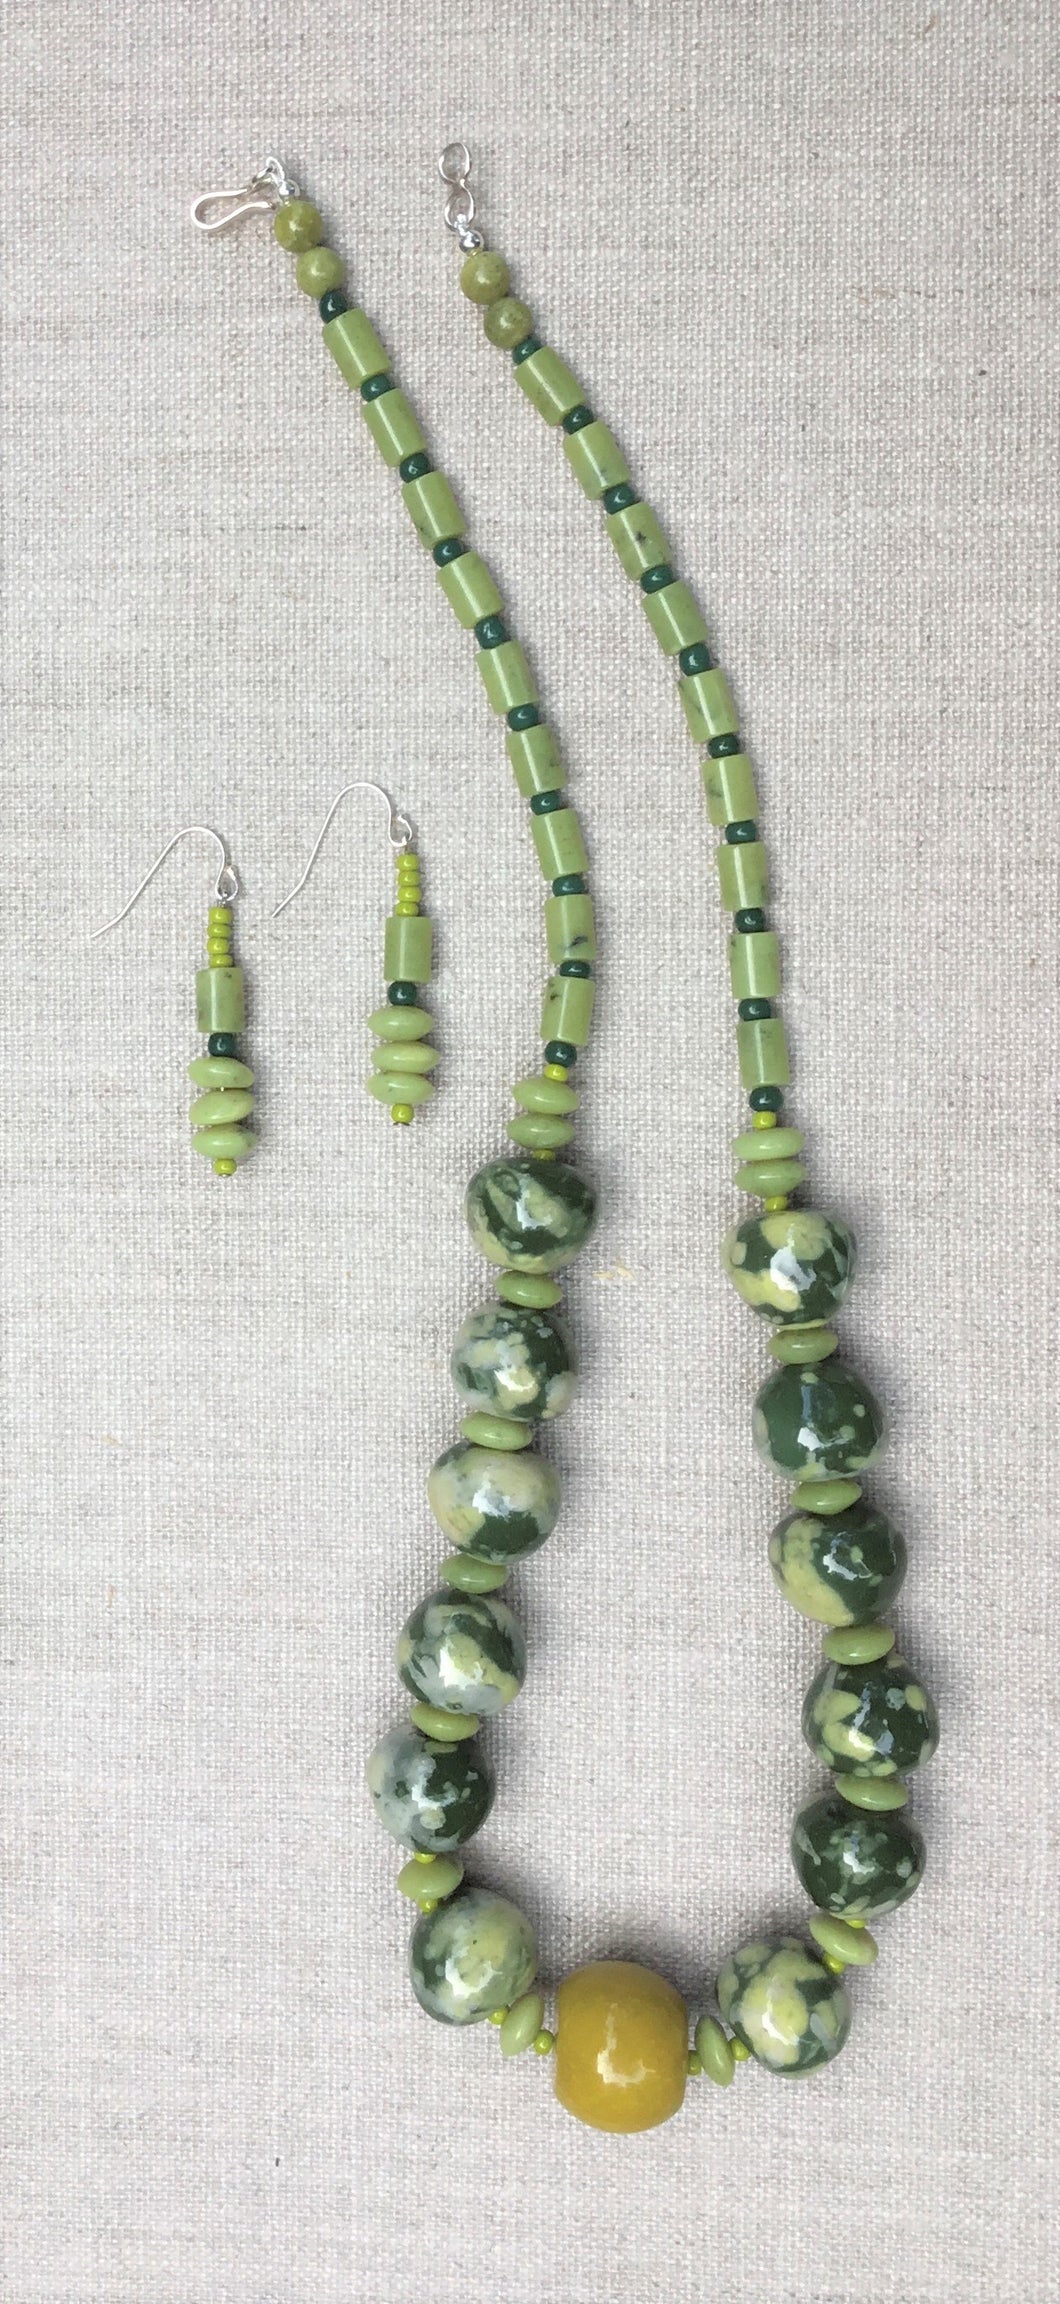 Necklace with Green Ceramic Beads